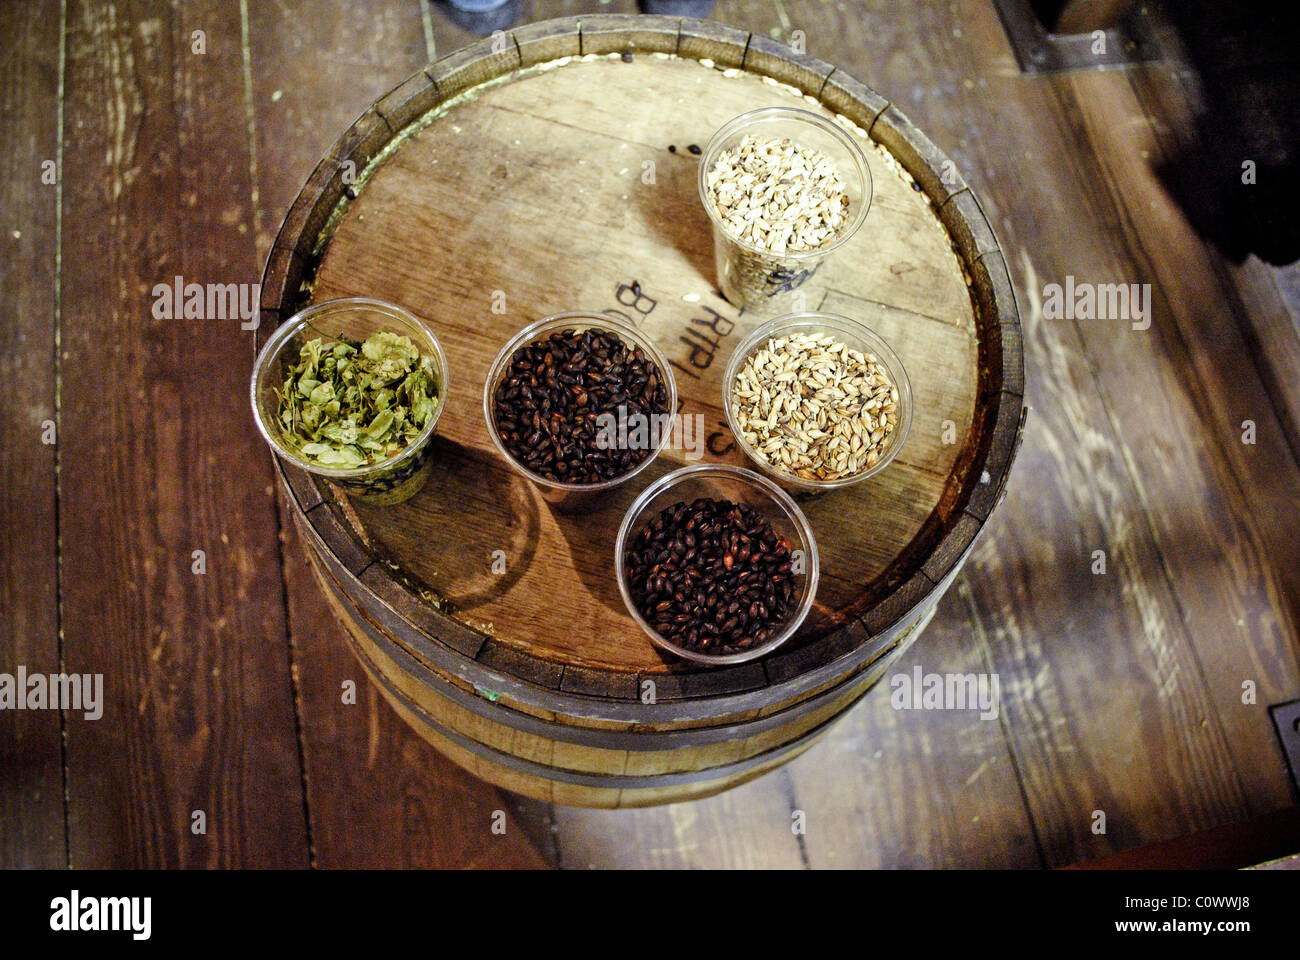 Hops, malt and barley used to make beer. Stock Photo